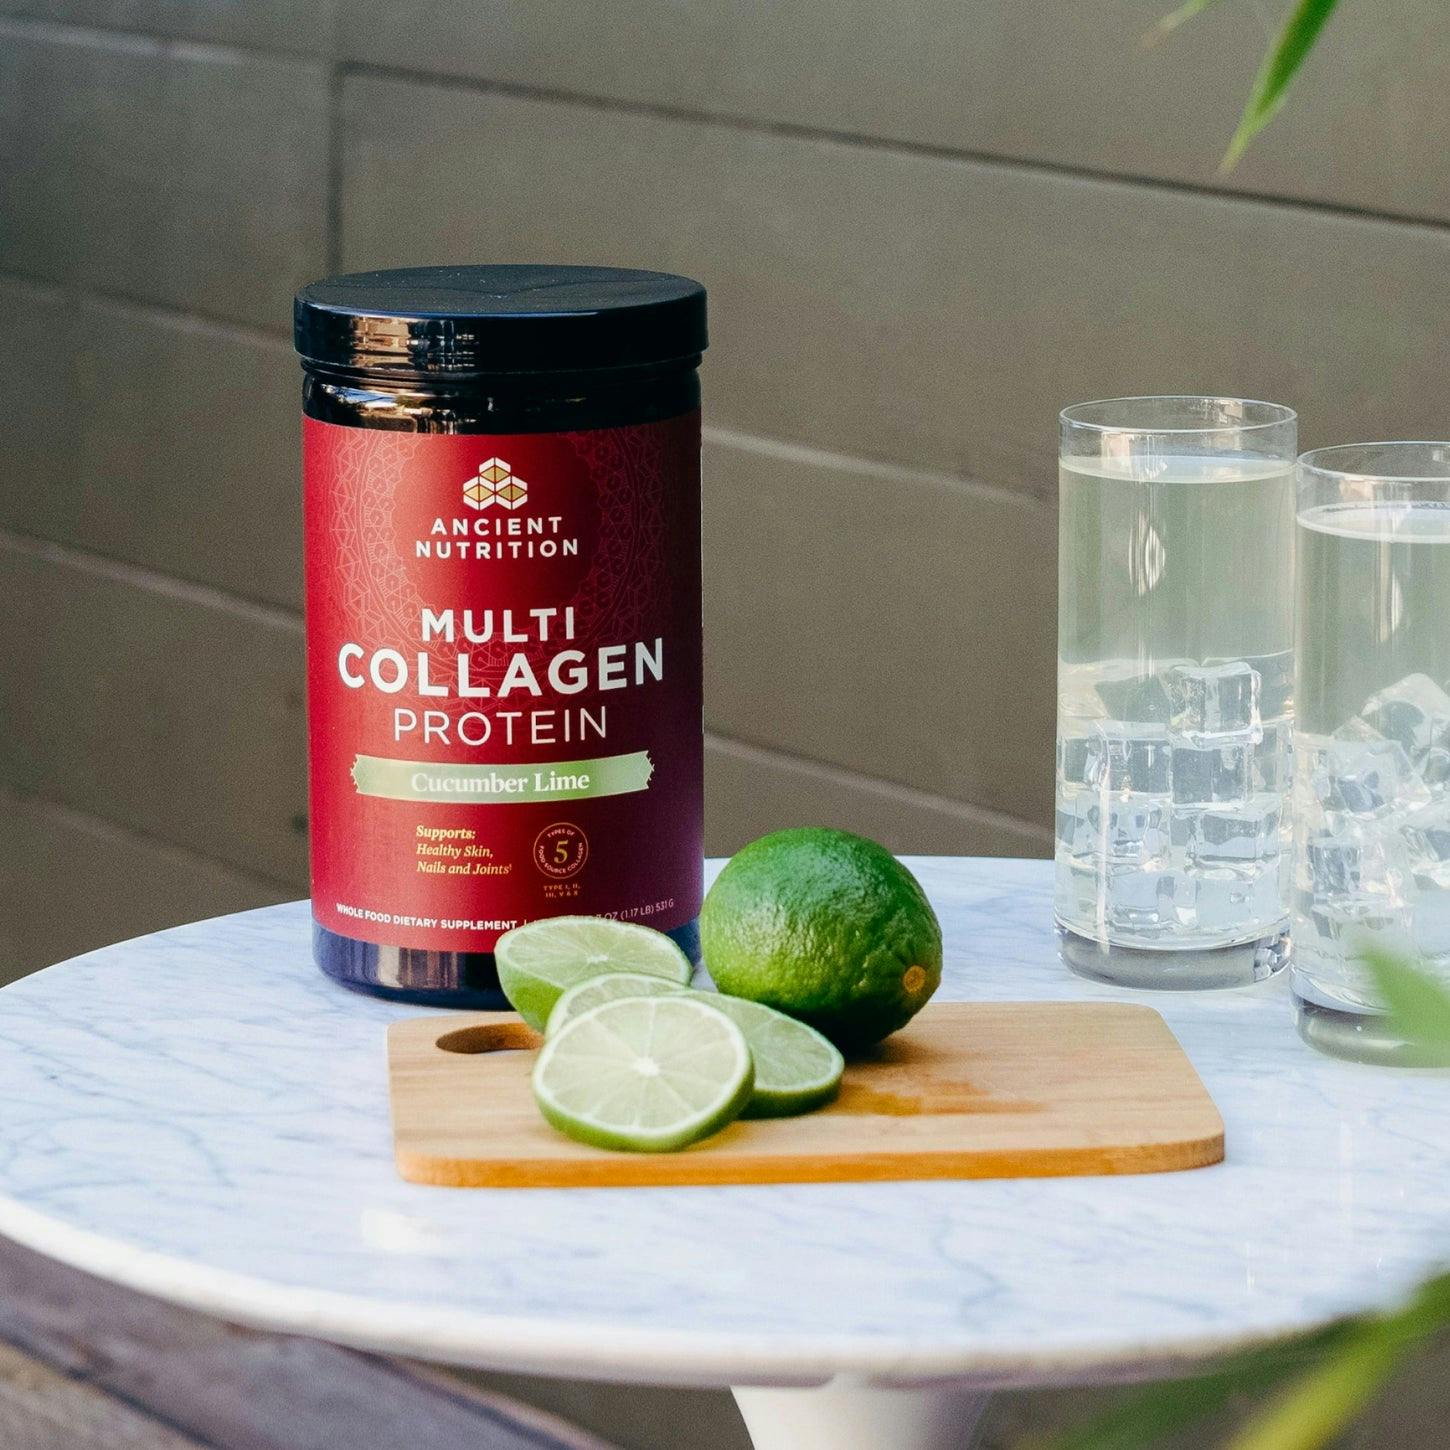 multi collagen protein cucumber lime bottle next to cutting board of limes